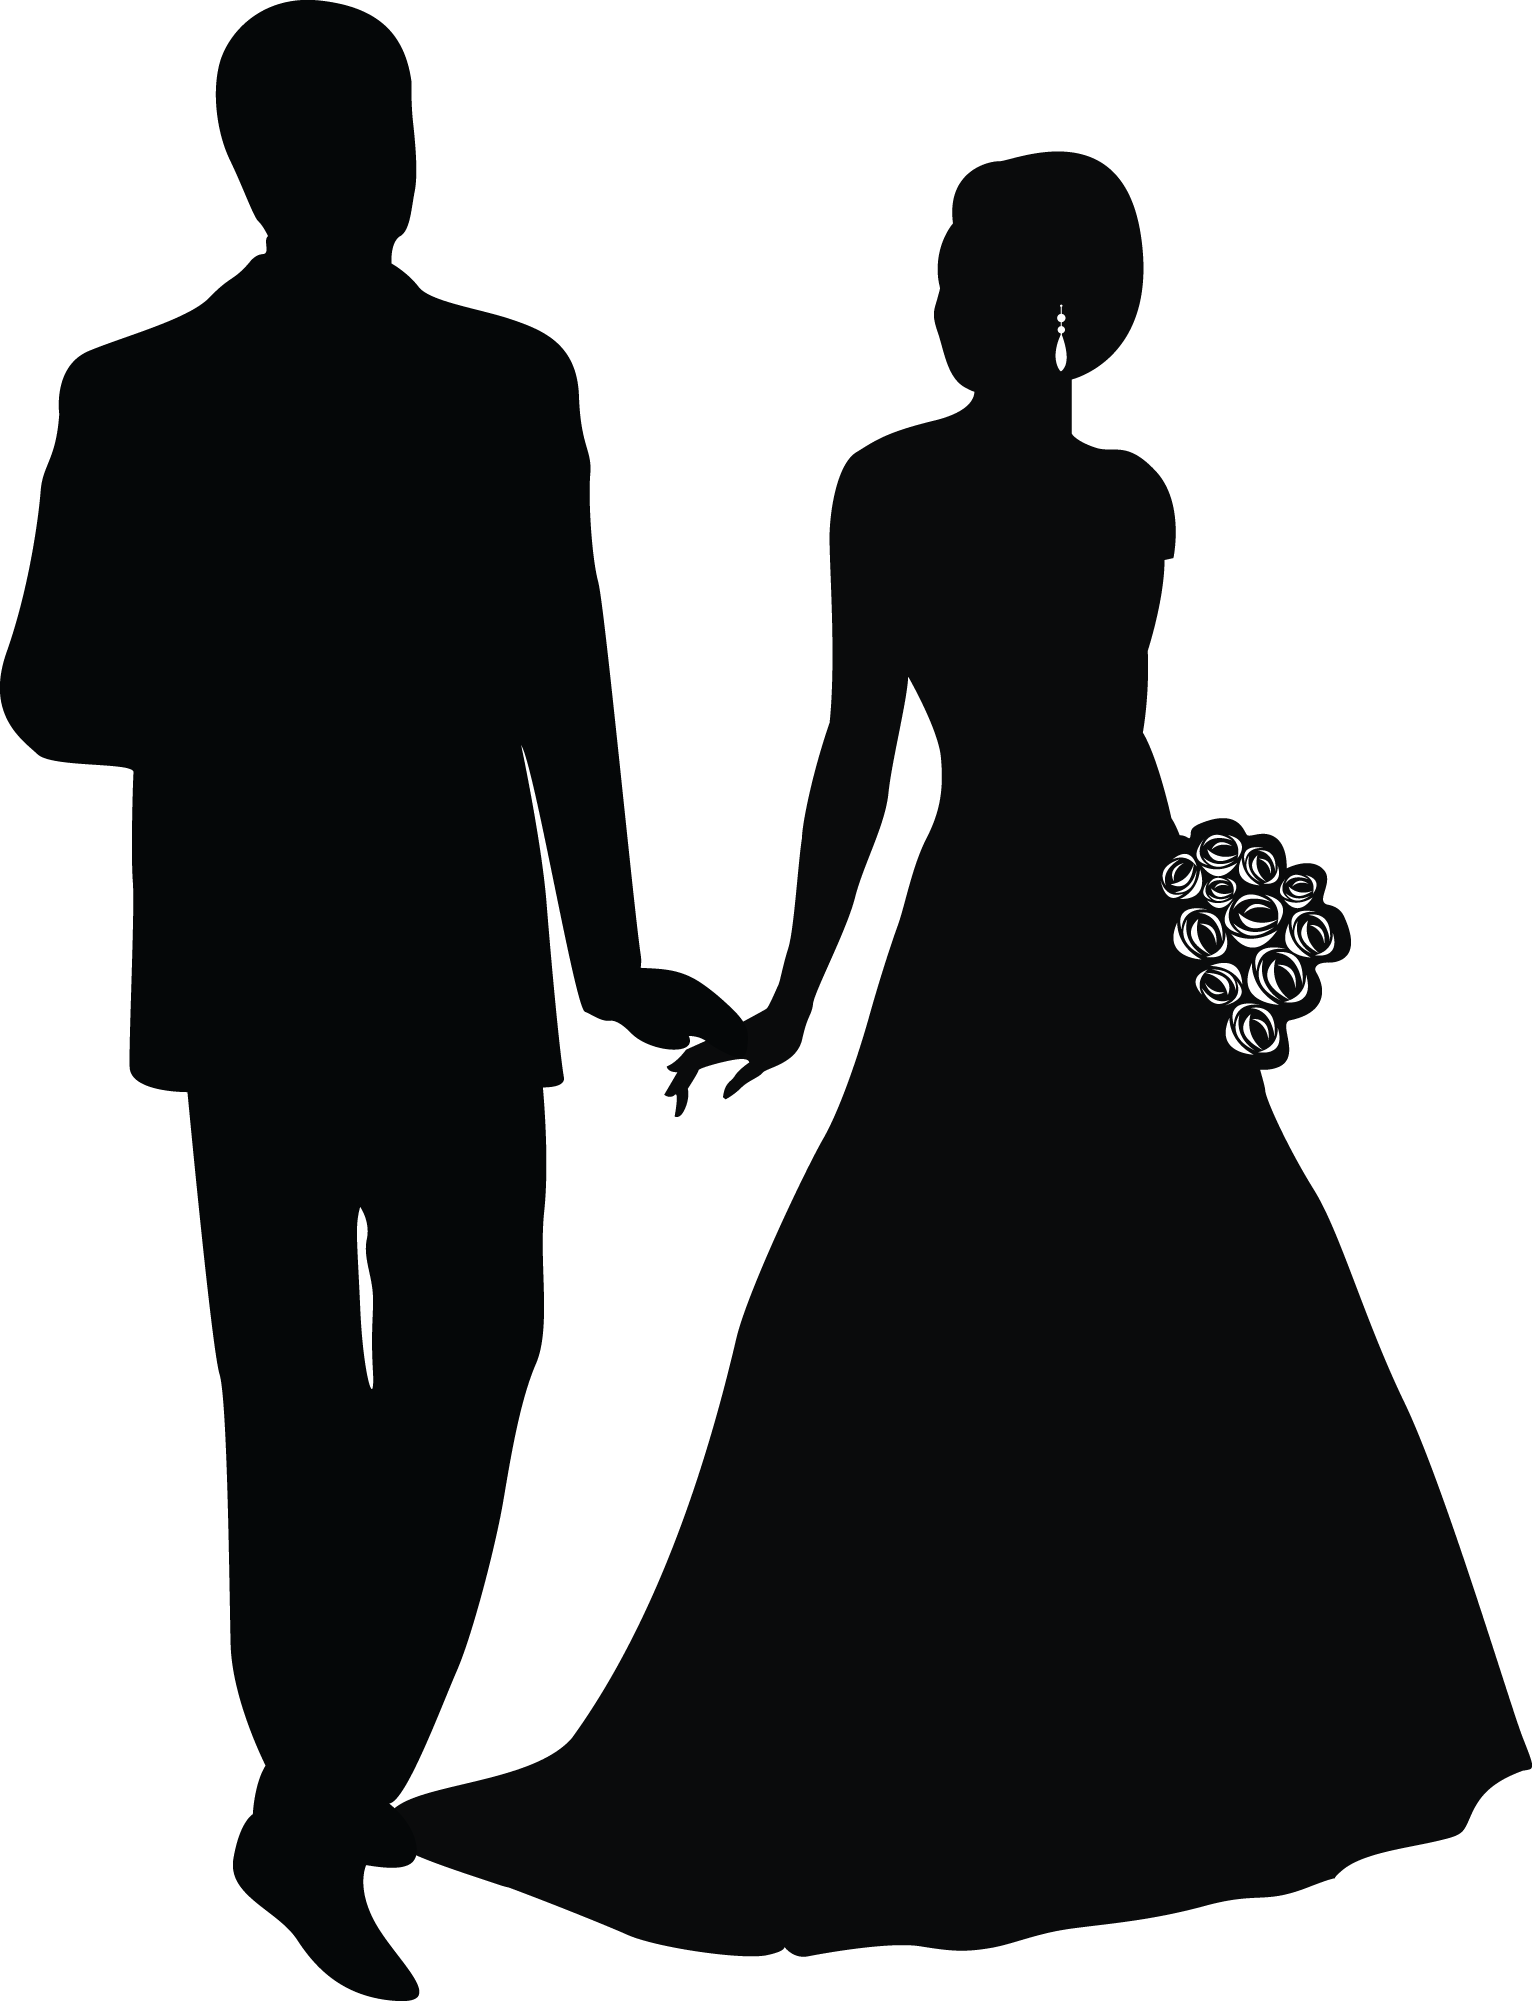 Doodle Art, Wedding Cards, Grooms, Colouring, Cardmaking, - Wedding Cake Topper Silhouette Groom And Bride, Acrylic (1532x2001)